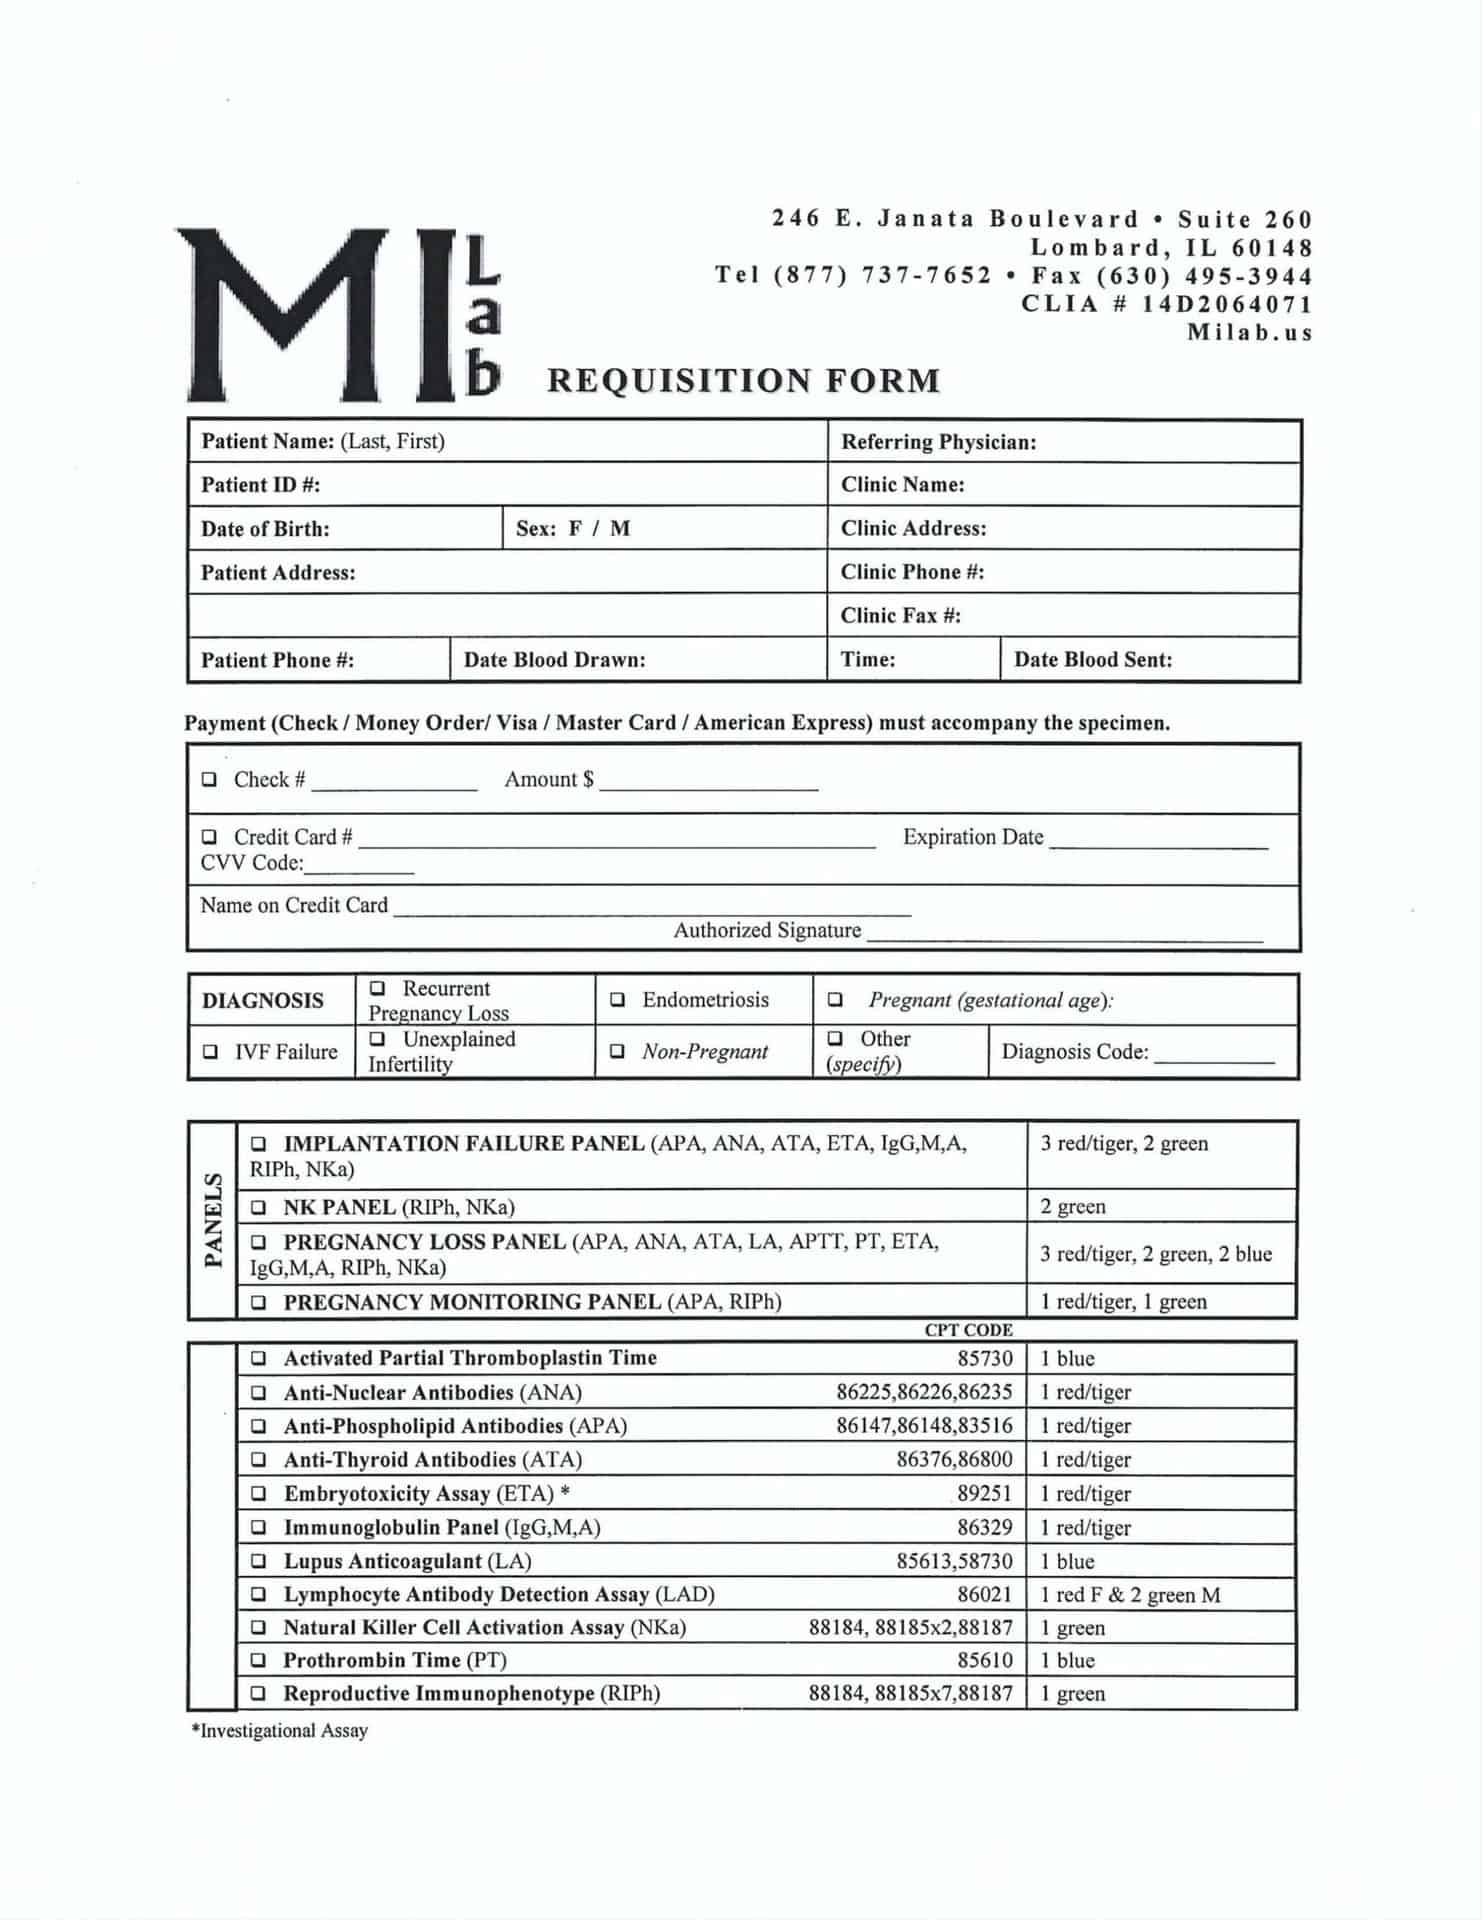 MILab.us Requisition Form 7-1-21_page-0001